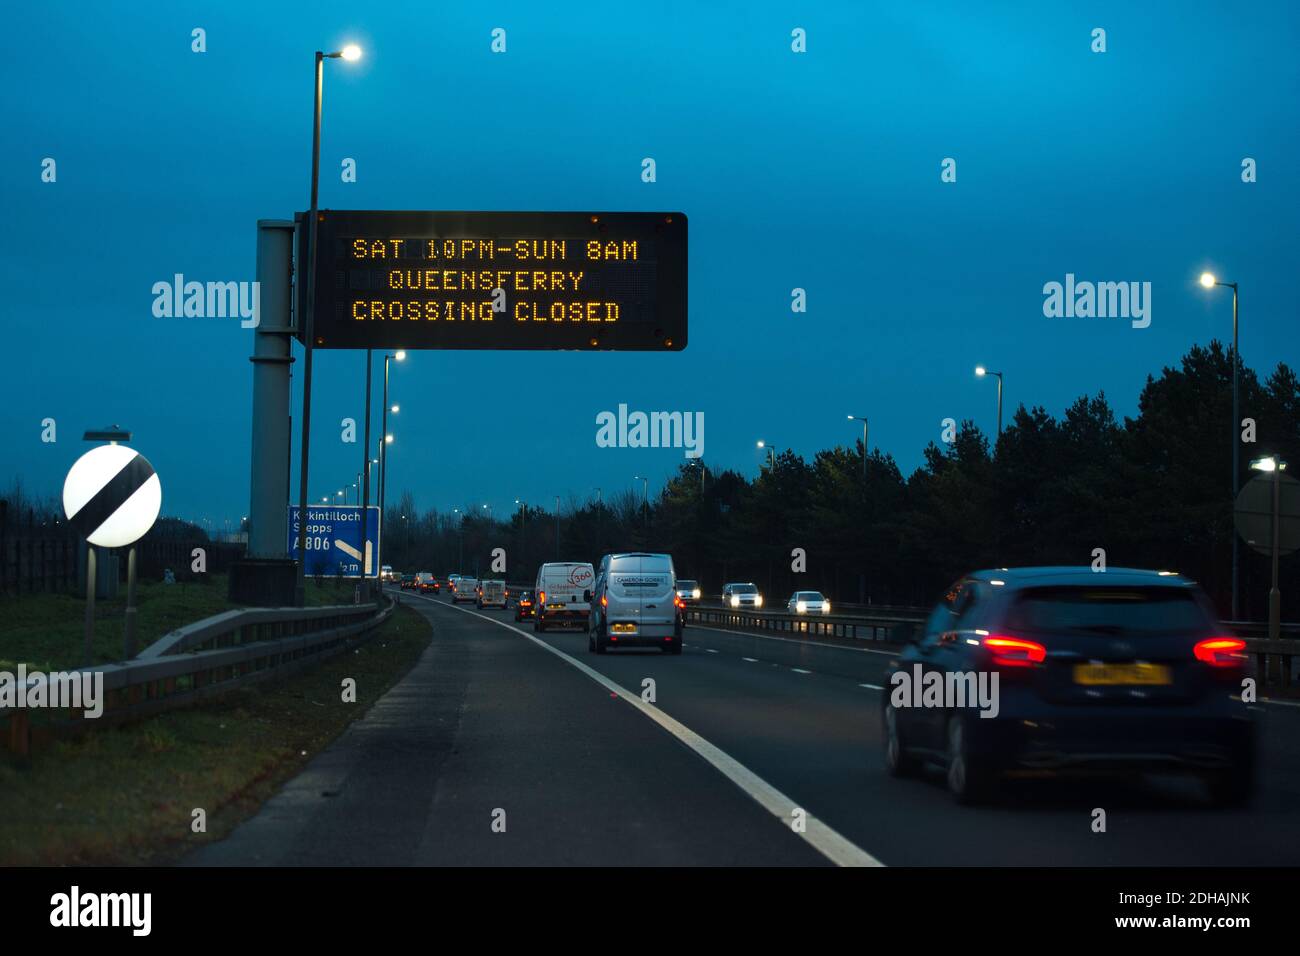 Glasgow, Scotland, UK. 10th Dec, 2020. Pictured: Motorway Road sign advising motorists not to travel over the Queensferry Crossing this weekend. Sign displays advisory warning, “SAT 10PM-SUN 8AM QUEENSFERRY CROSSING CLOSED” Credit: Colin Fisher/Alamy Live News Stock Photo